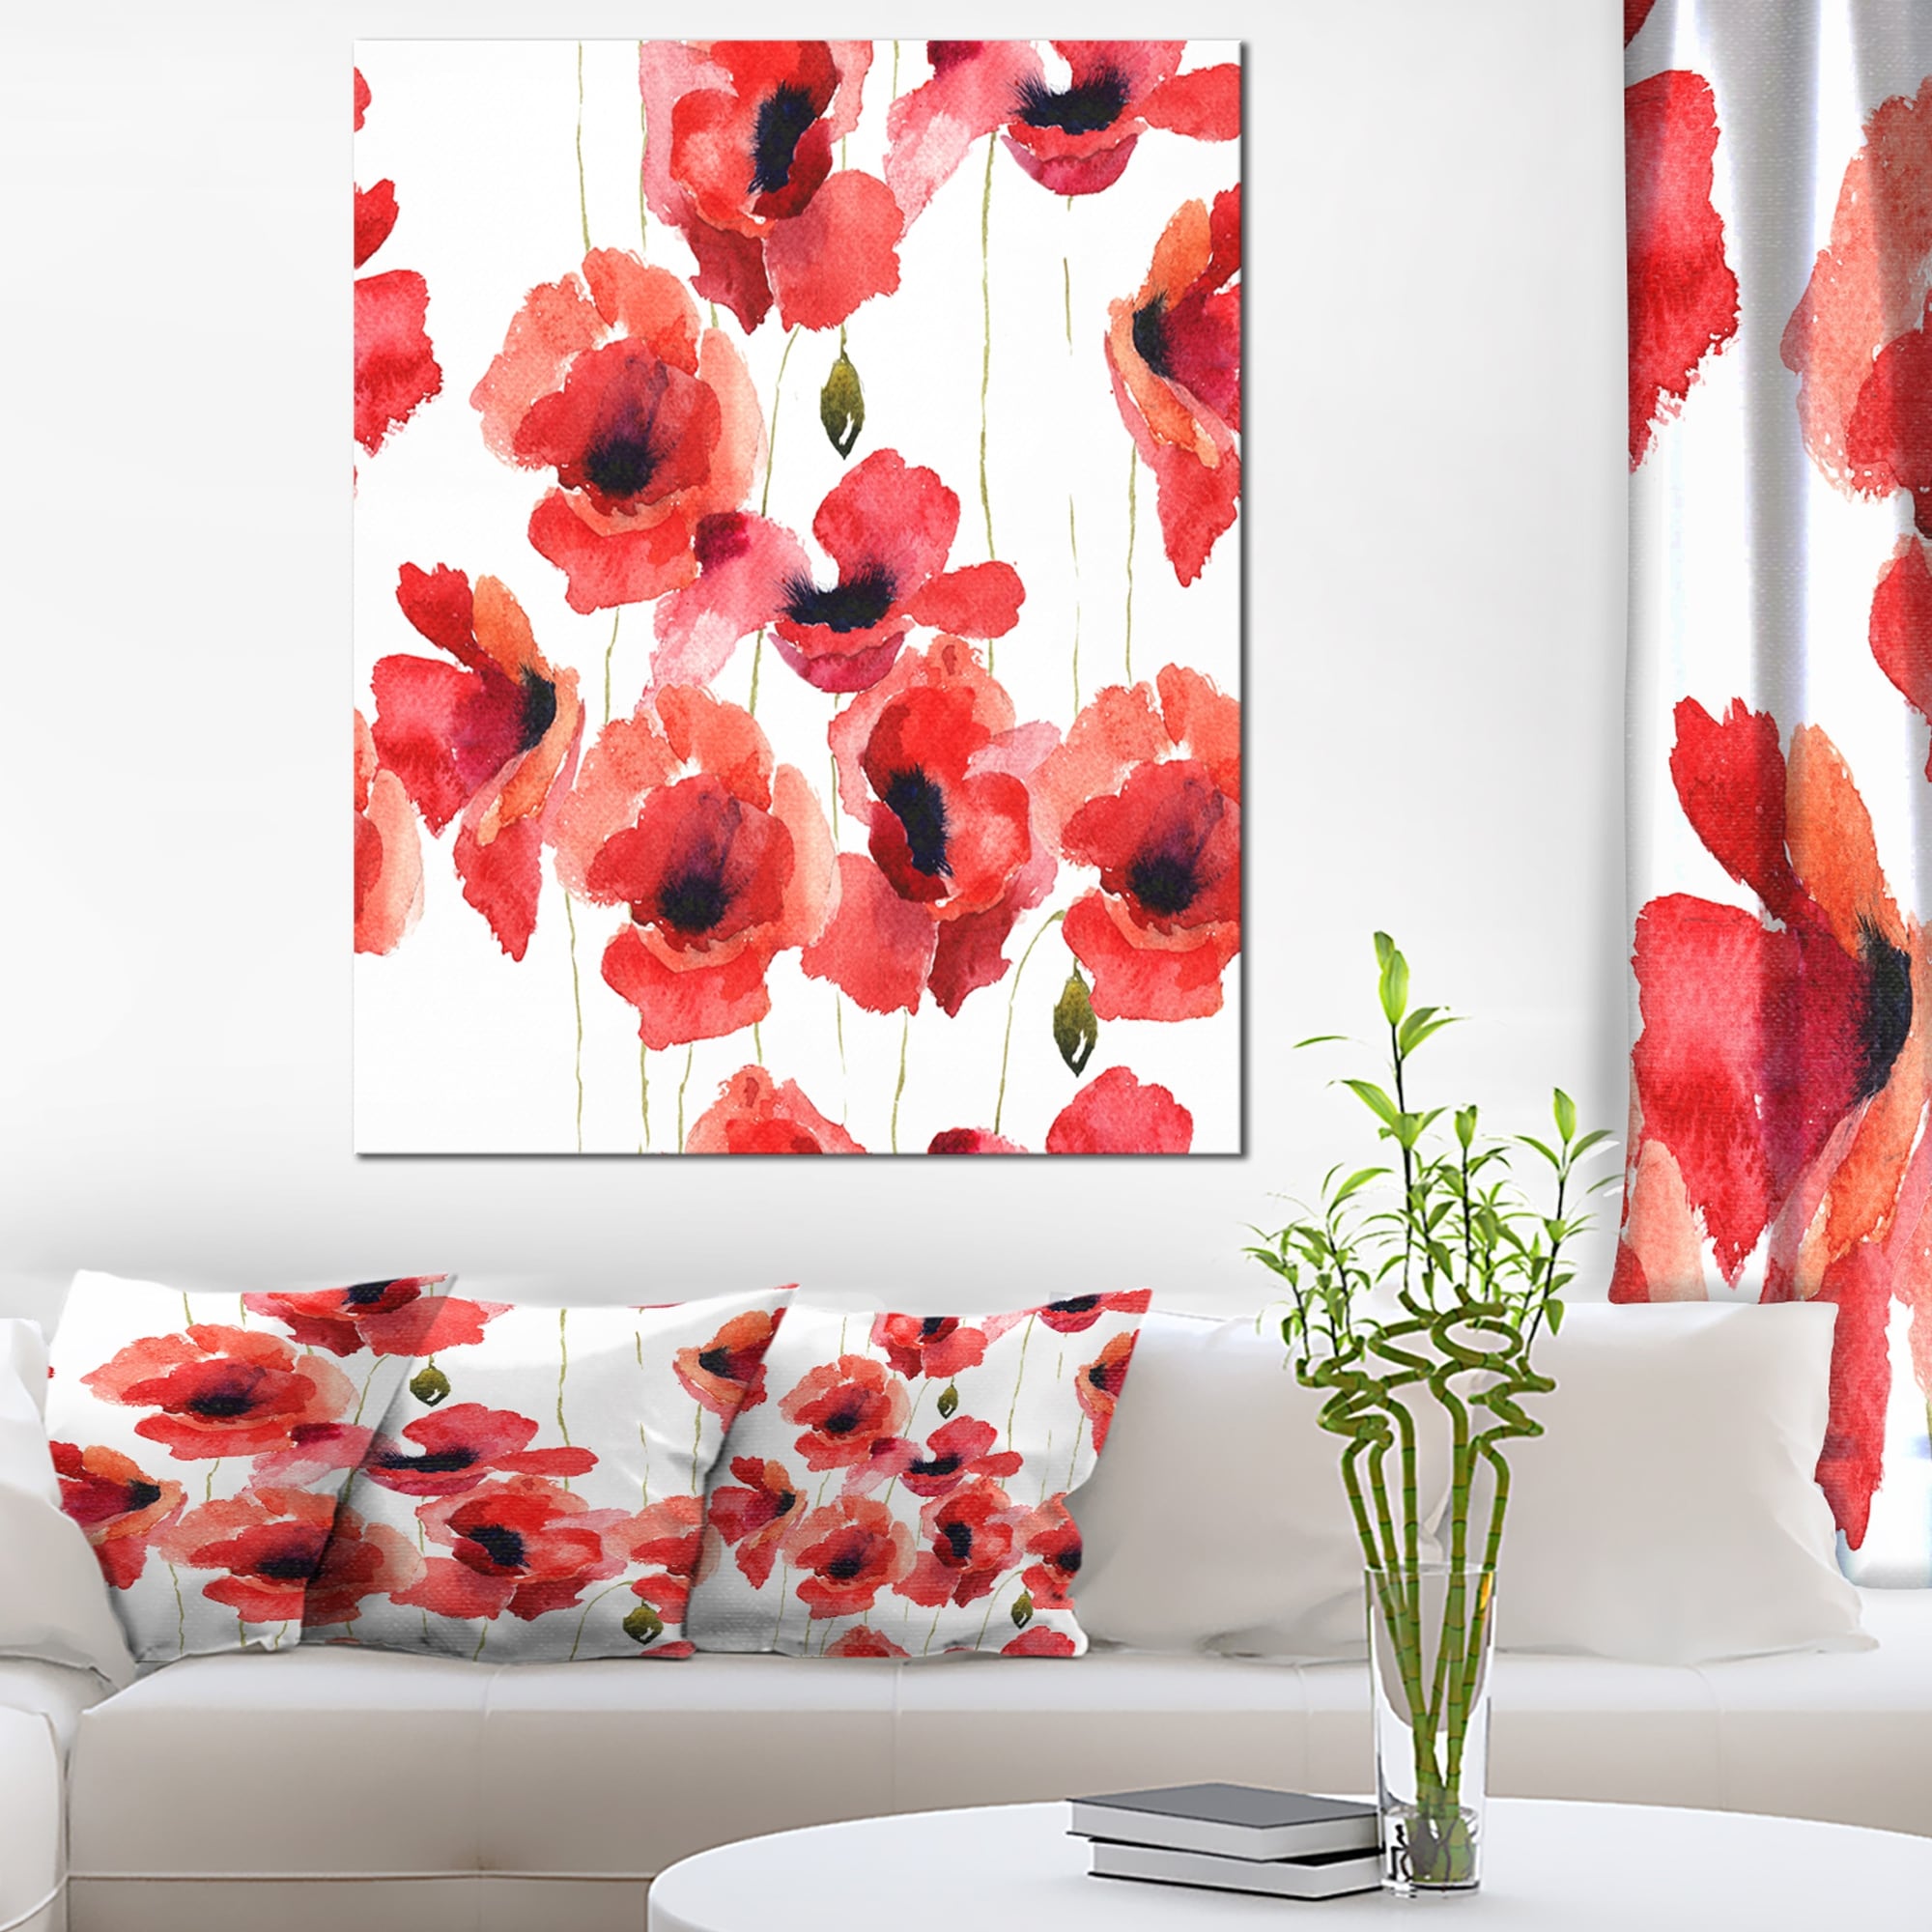 Visual Art Decor Pink Grey Flowers Painting Prints Poppy Tulips Rose Floral Canvas Wall Art Premium Gallery Wrapped Artwork for Modern Home Office Bedroom Bathroom Decoration Gift 